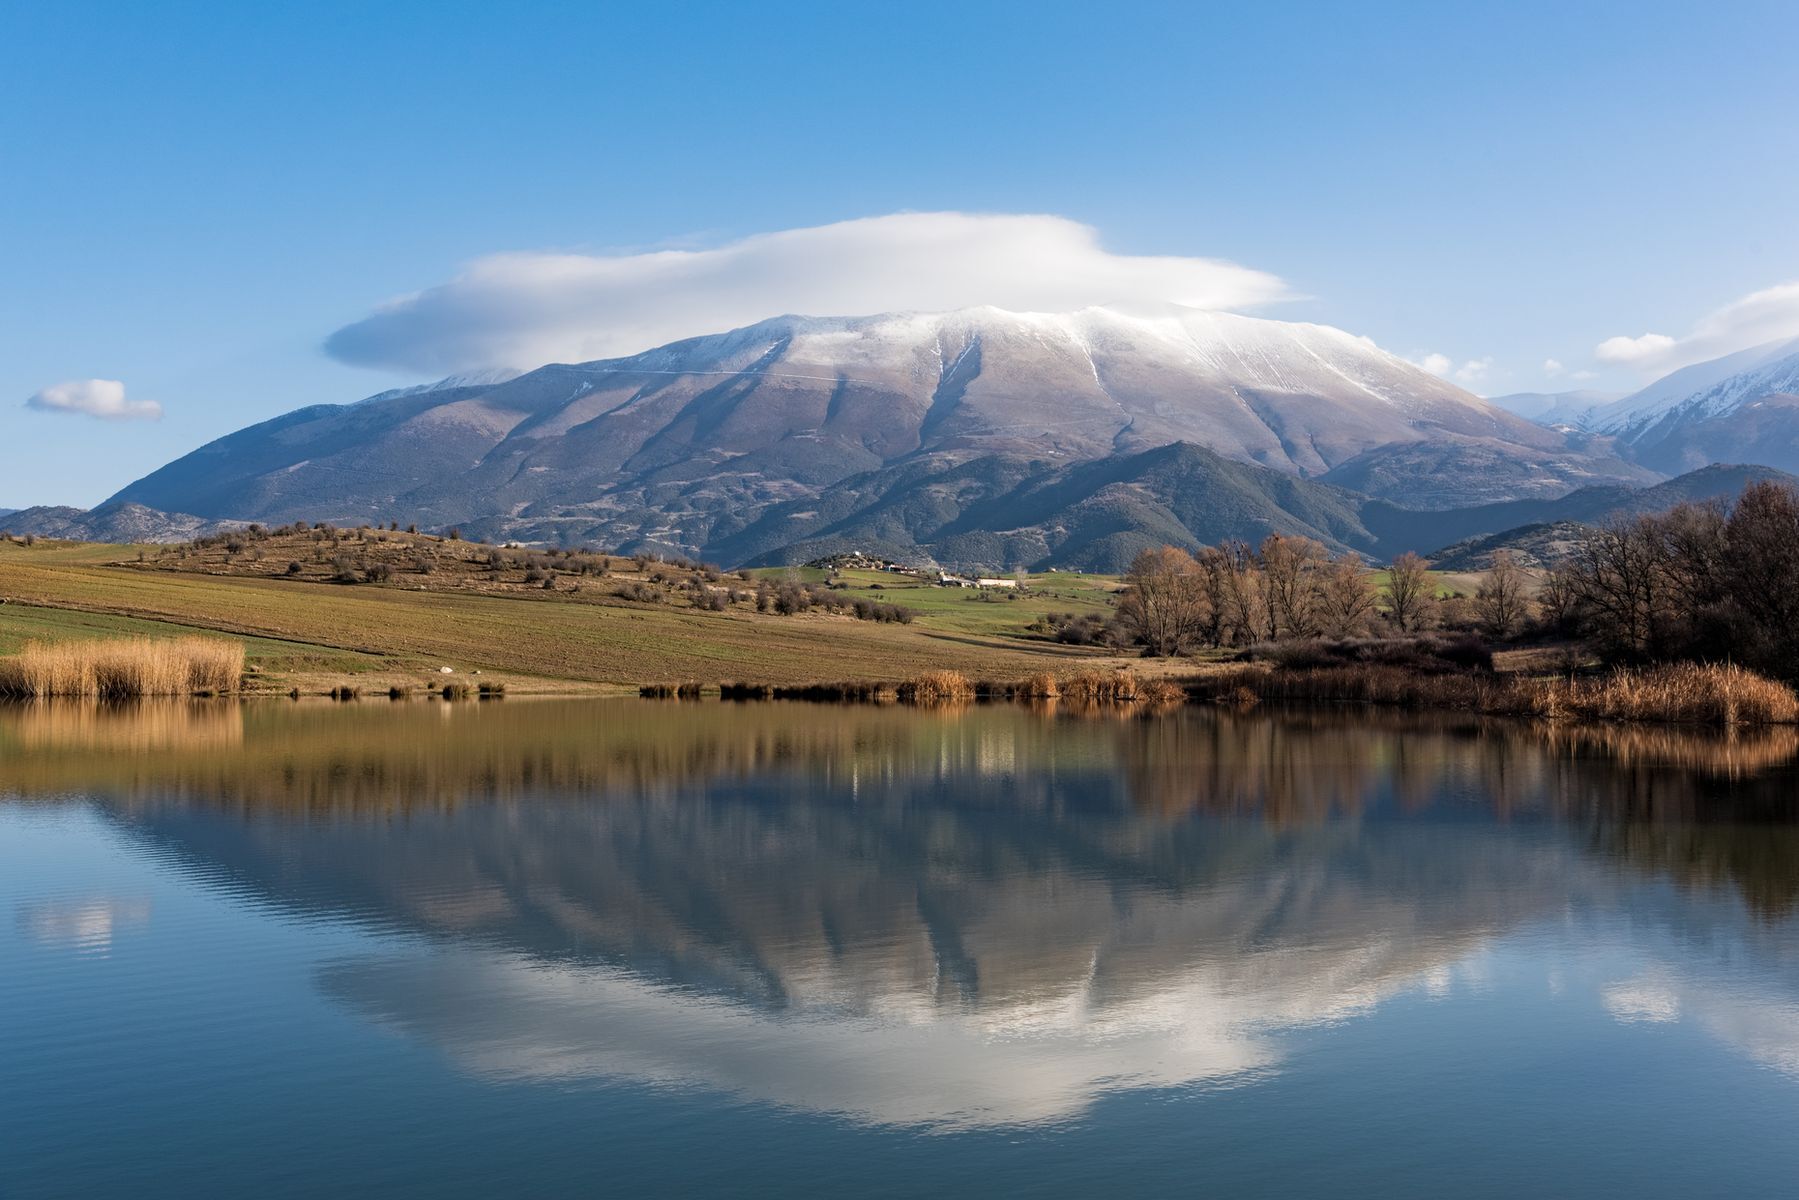 <a href="https://www.discovergreece.com/macedonia/olympus" rel="noreferrer noopener">Mount Olympus</a>, the mythical home of the Greek gods, offers majestic experiences combining nature and history in the country’s northern region. Hikers to the summit of Greece’s highest peak, for instance, can admire views of the Aegean Sea and mainland Greece. The <a href="https://www.youtube.com/watch?v=IL5w-eqdMZY" rel="noreferrer noopener">Enipeas gorge’s</a> rivers and waterfalls also number among Mount Olympus’s finest attractions.